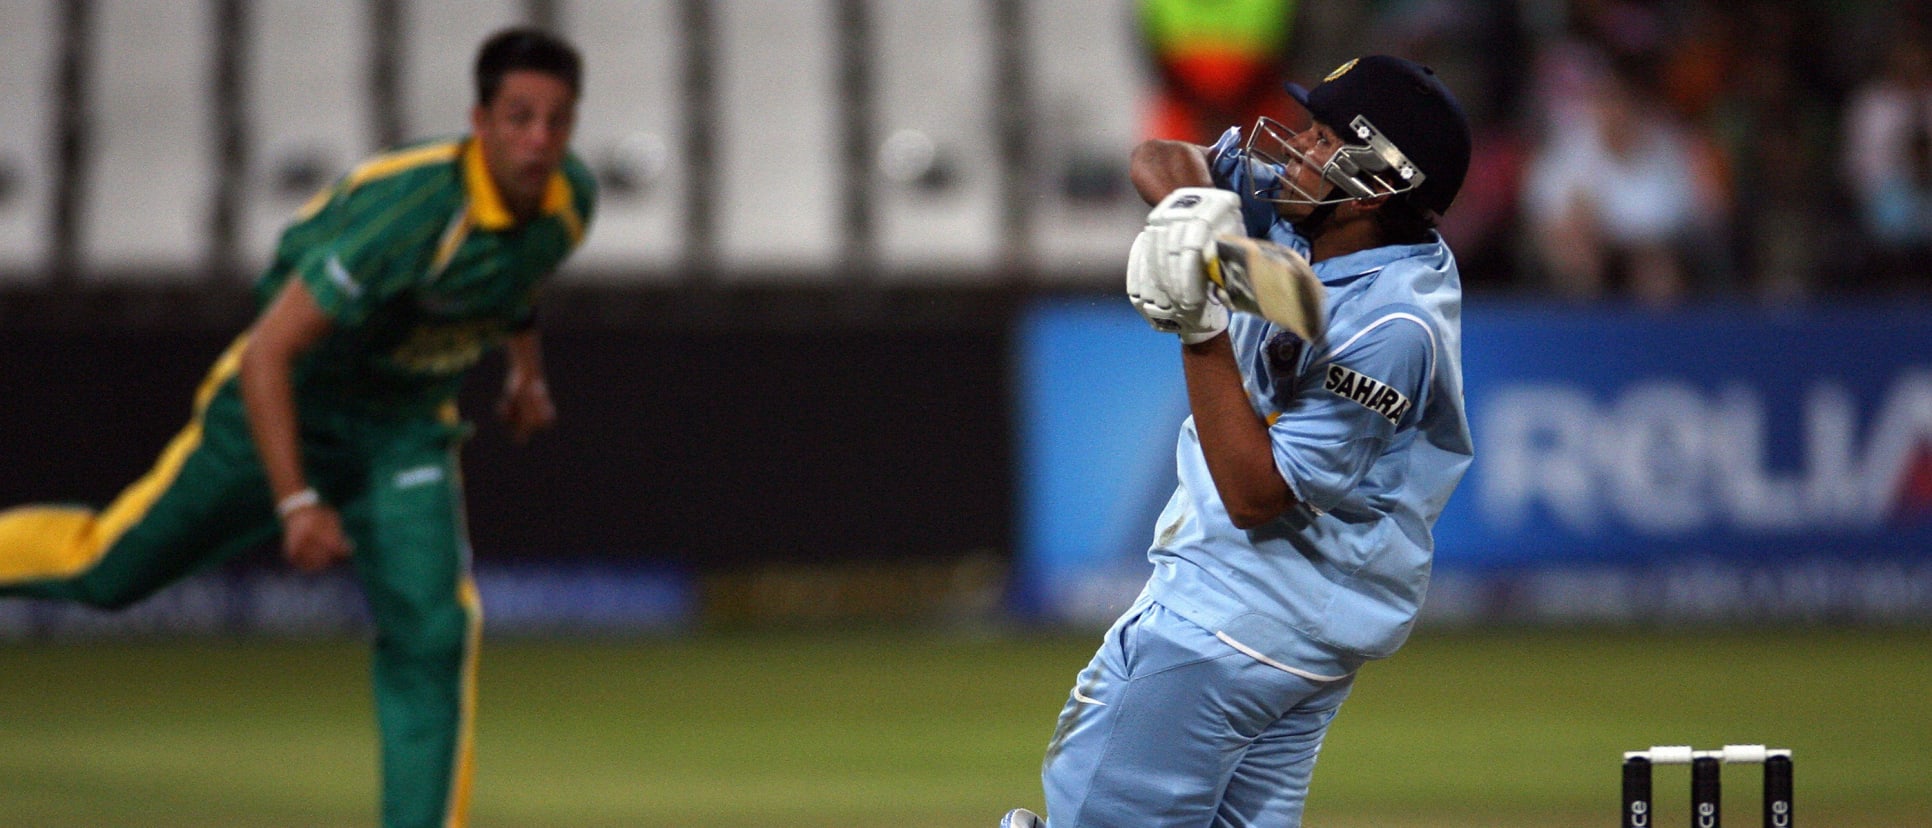 Rohit scored a match-defining 50* in India's 37-run win against South Africa in the Super 8 fixture of the ICC WT20 2007